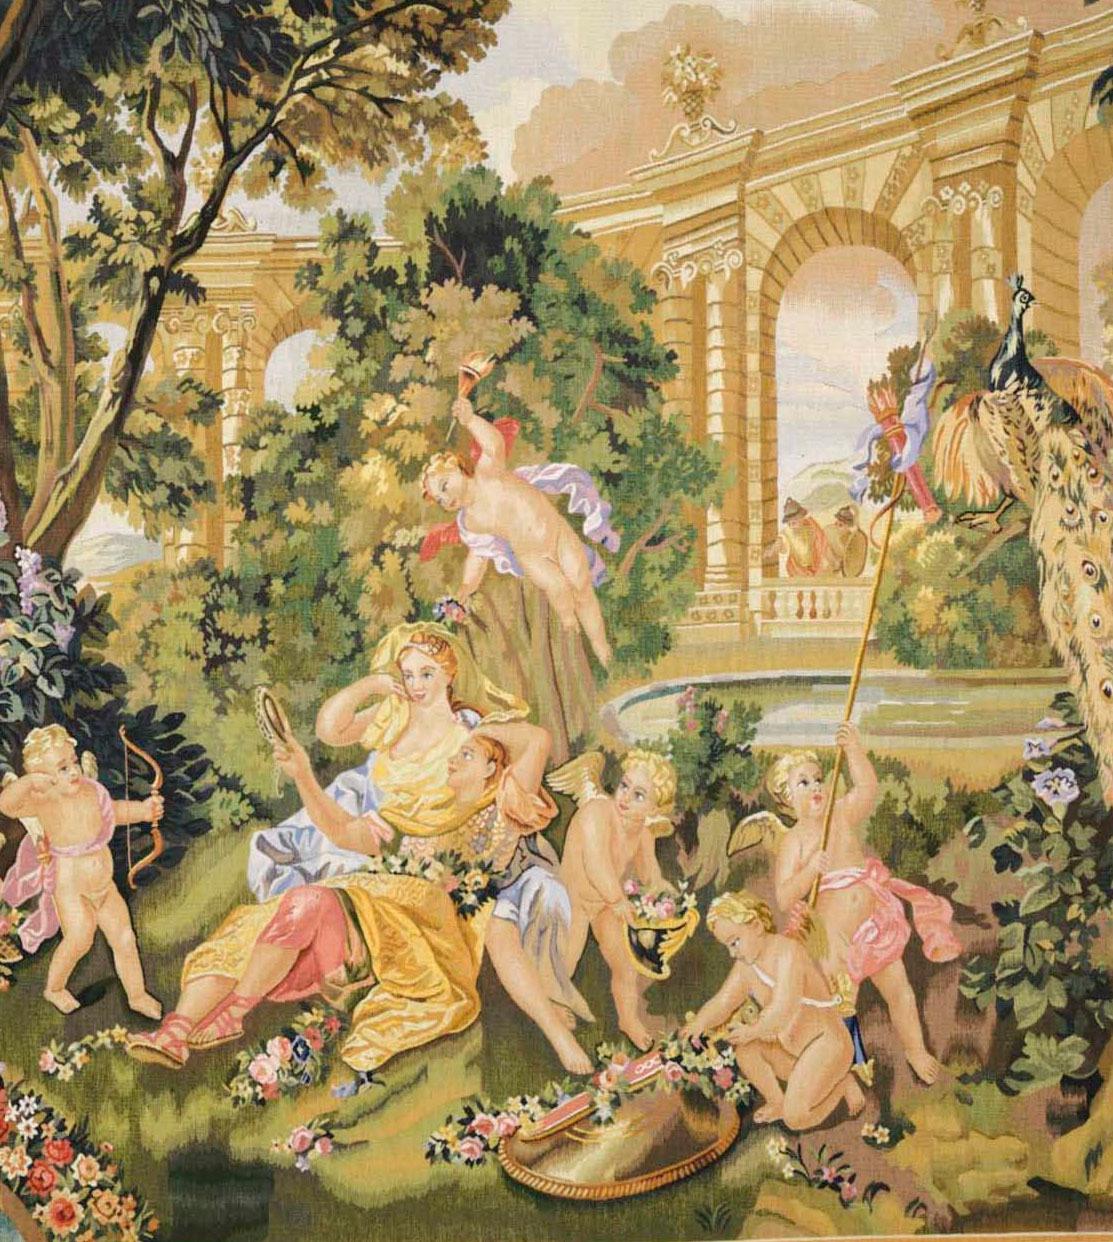 Recreation of a classical Gobelins design of cherubs and a young couple, in an opulent garden setting of lush crops in a very romantic palette of greens and pinks. Creating the perfect setting for romance. The fountain cascading water sets the scene